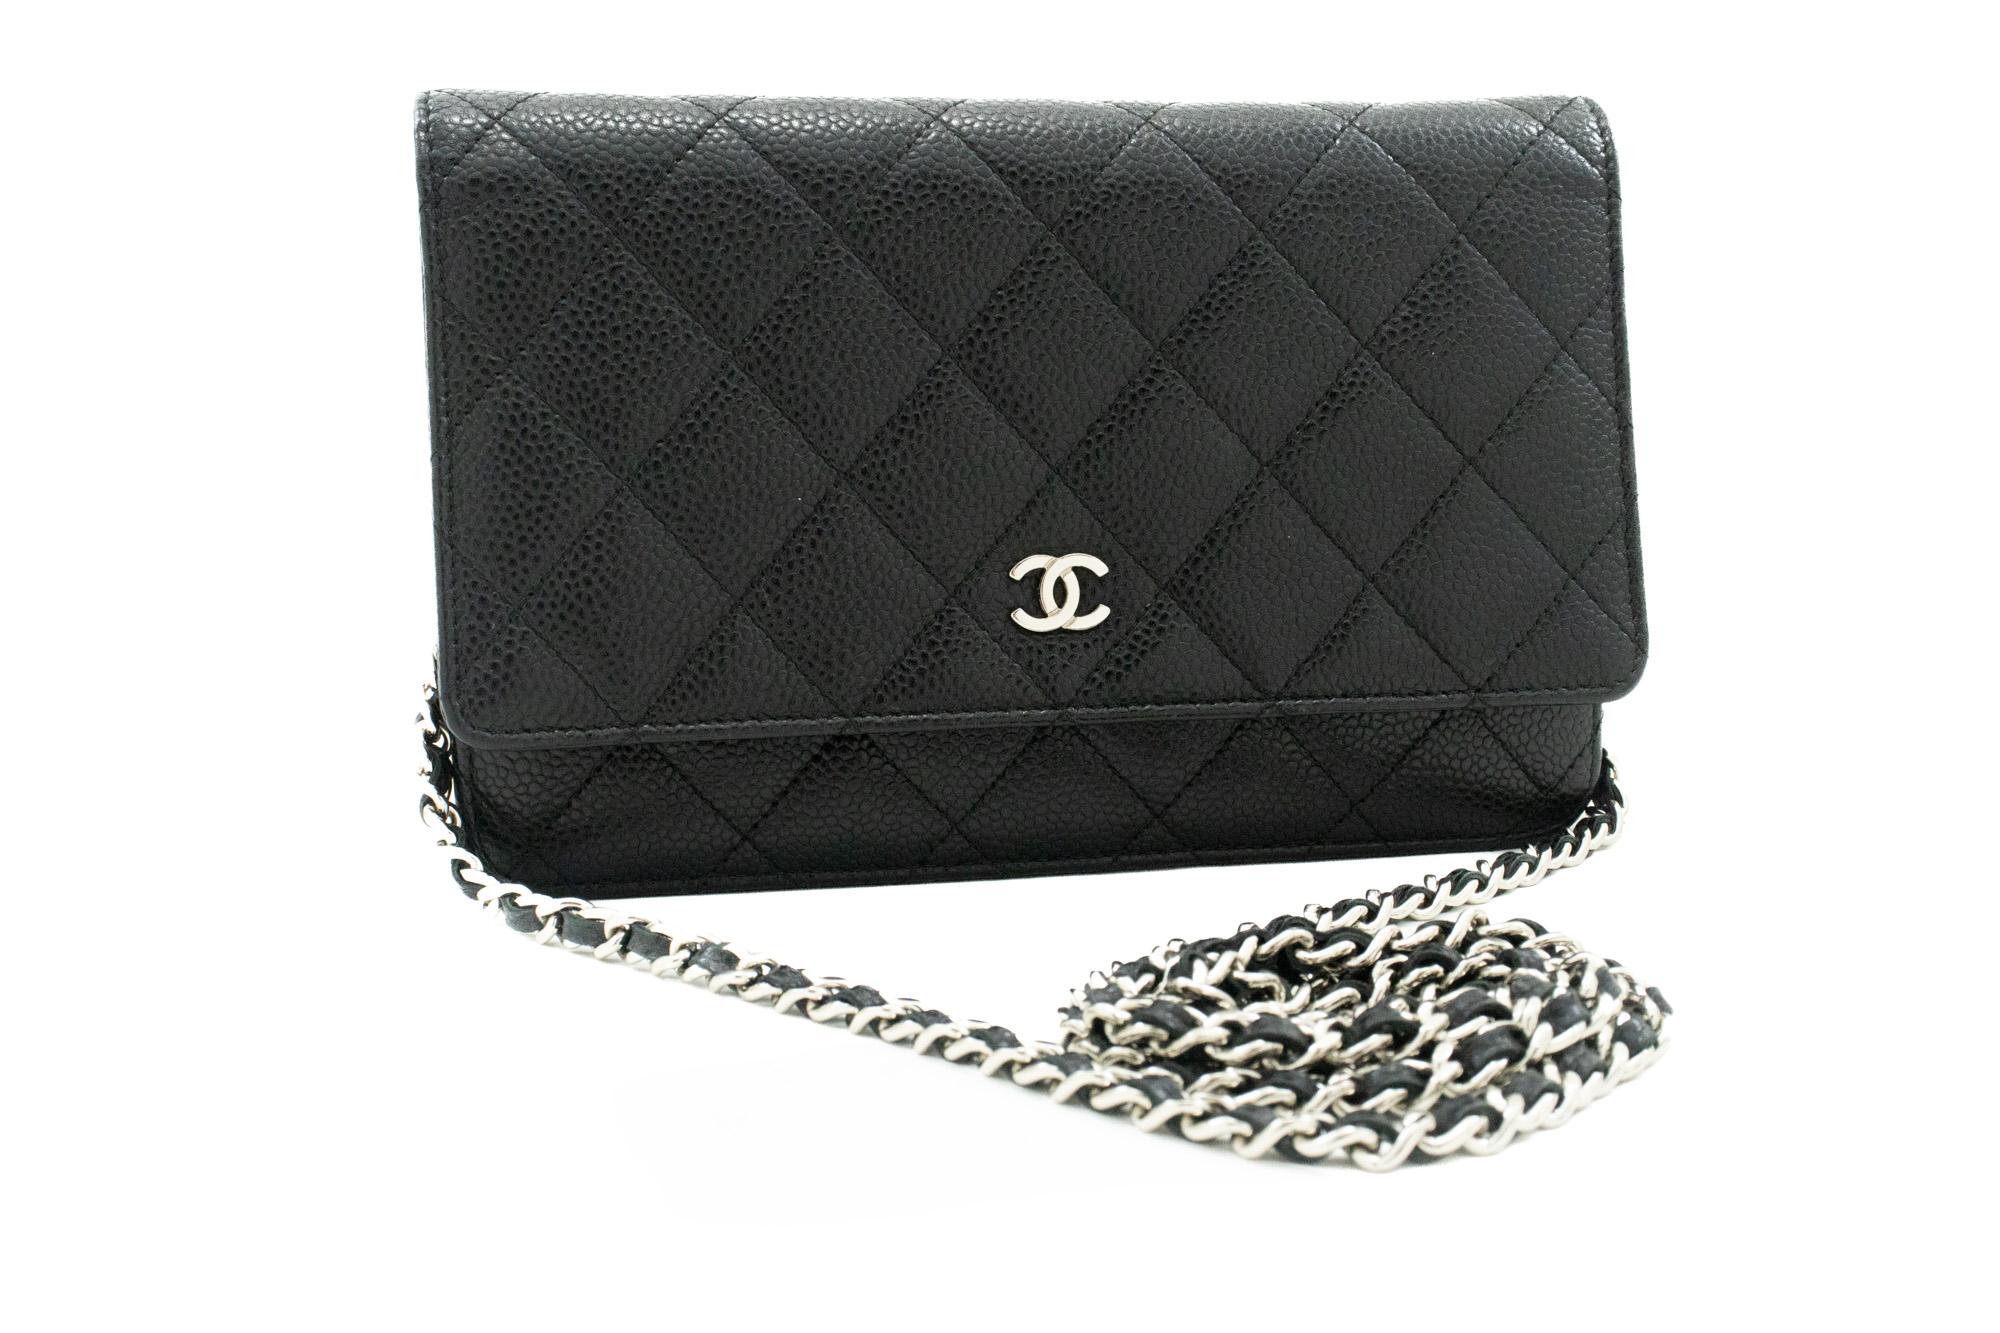 An authentic CHANEL Caviar Wallet On Chain WOC Black Shoulder Bag Crossbody. The color is Black. The outside material is Leather. The pattern is Solid. This item is Contemporary. The year of manufacture would be 2015.
Conditions & Ratings
Outside